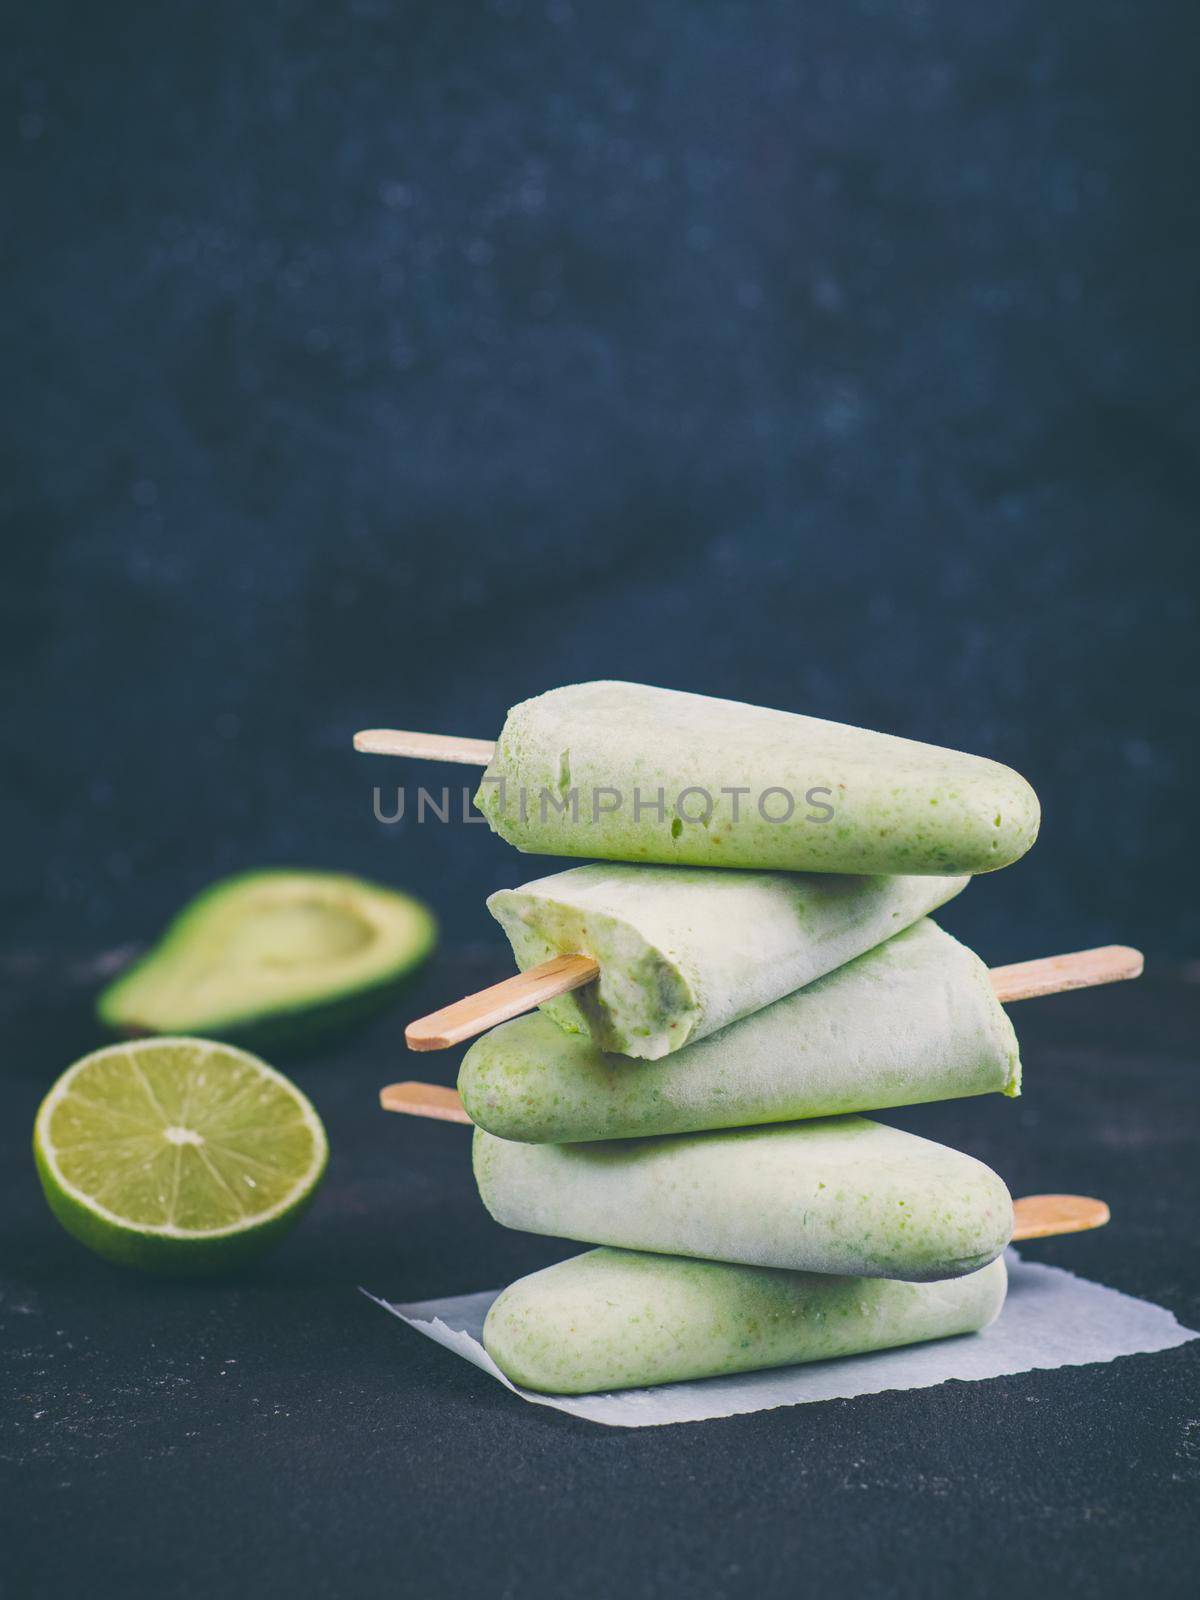 Homemade raw vegan avocado lime popsicle. Sugar-free, non-dairy green ice cream on dark blue textured background. Copy space. Ideas and recipes for healthy snack, dessert or smoothie. Vertical.